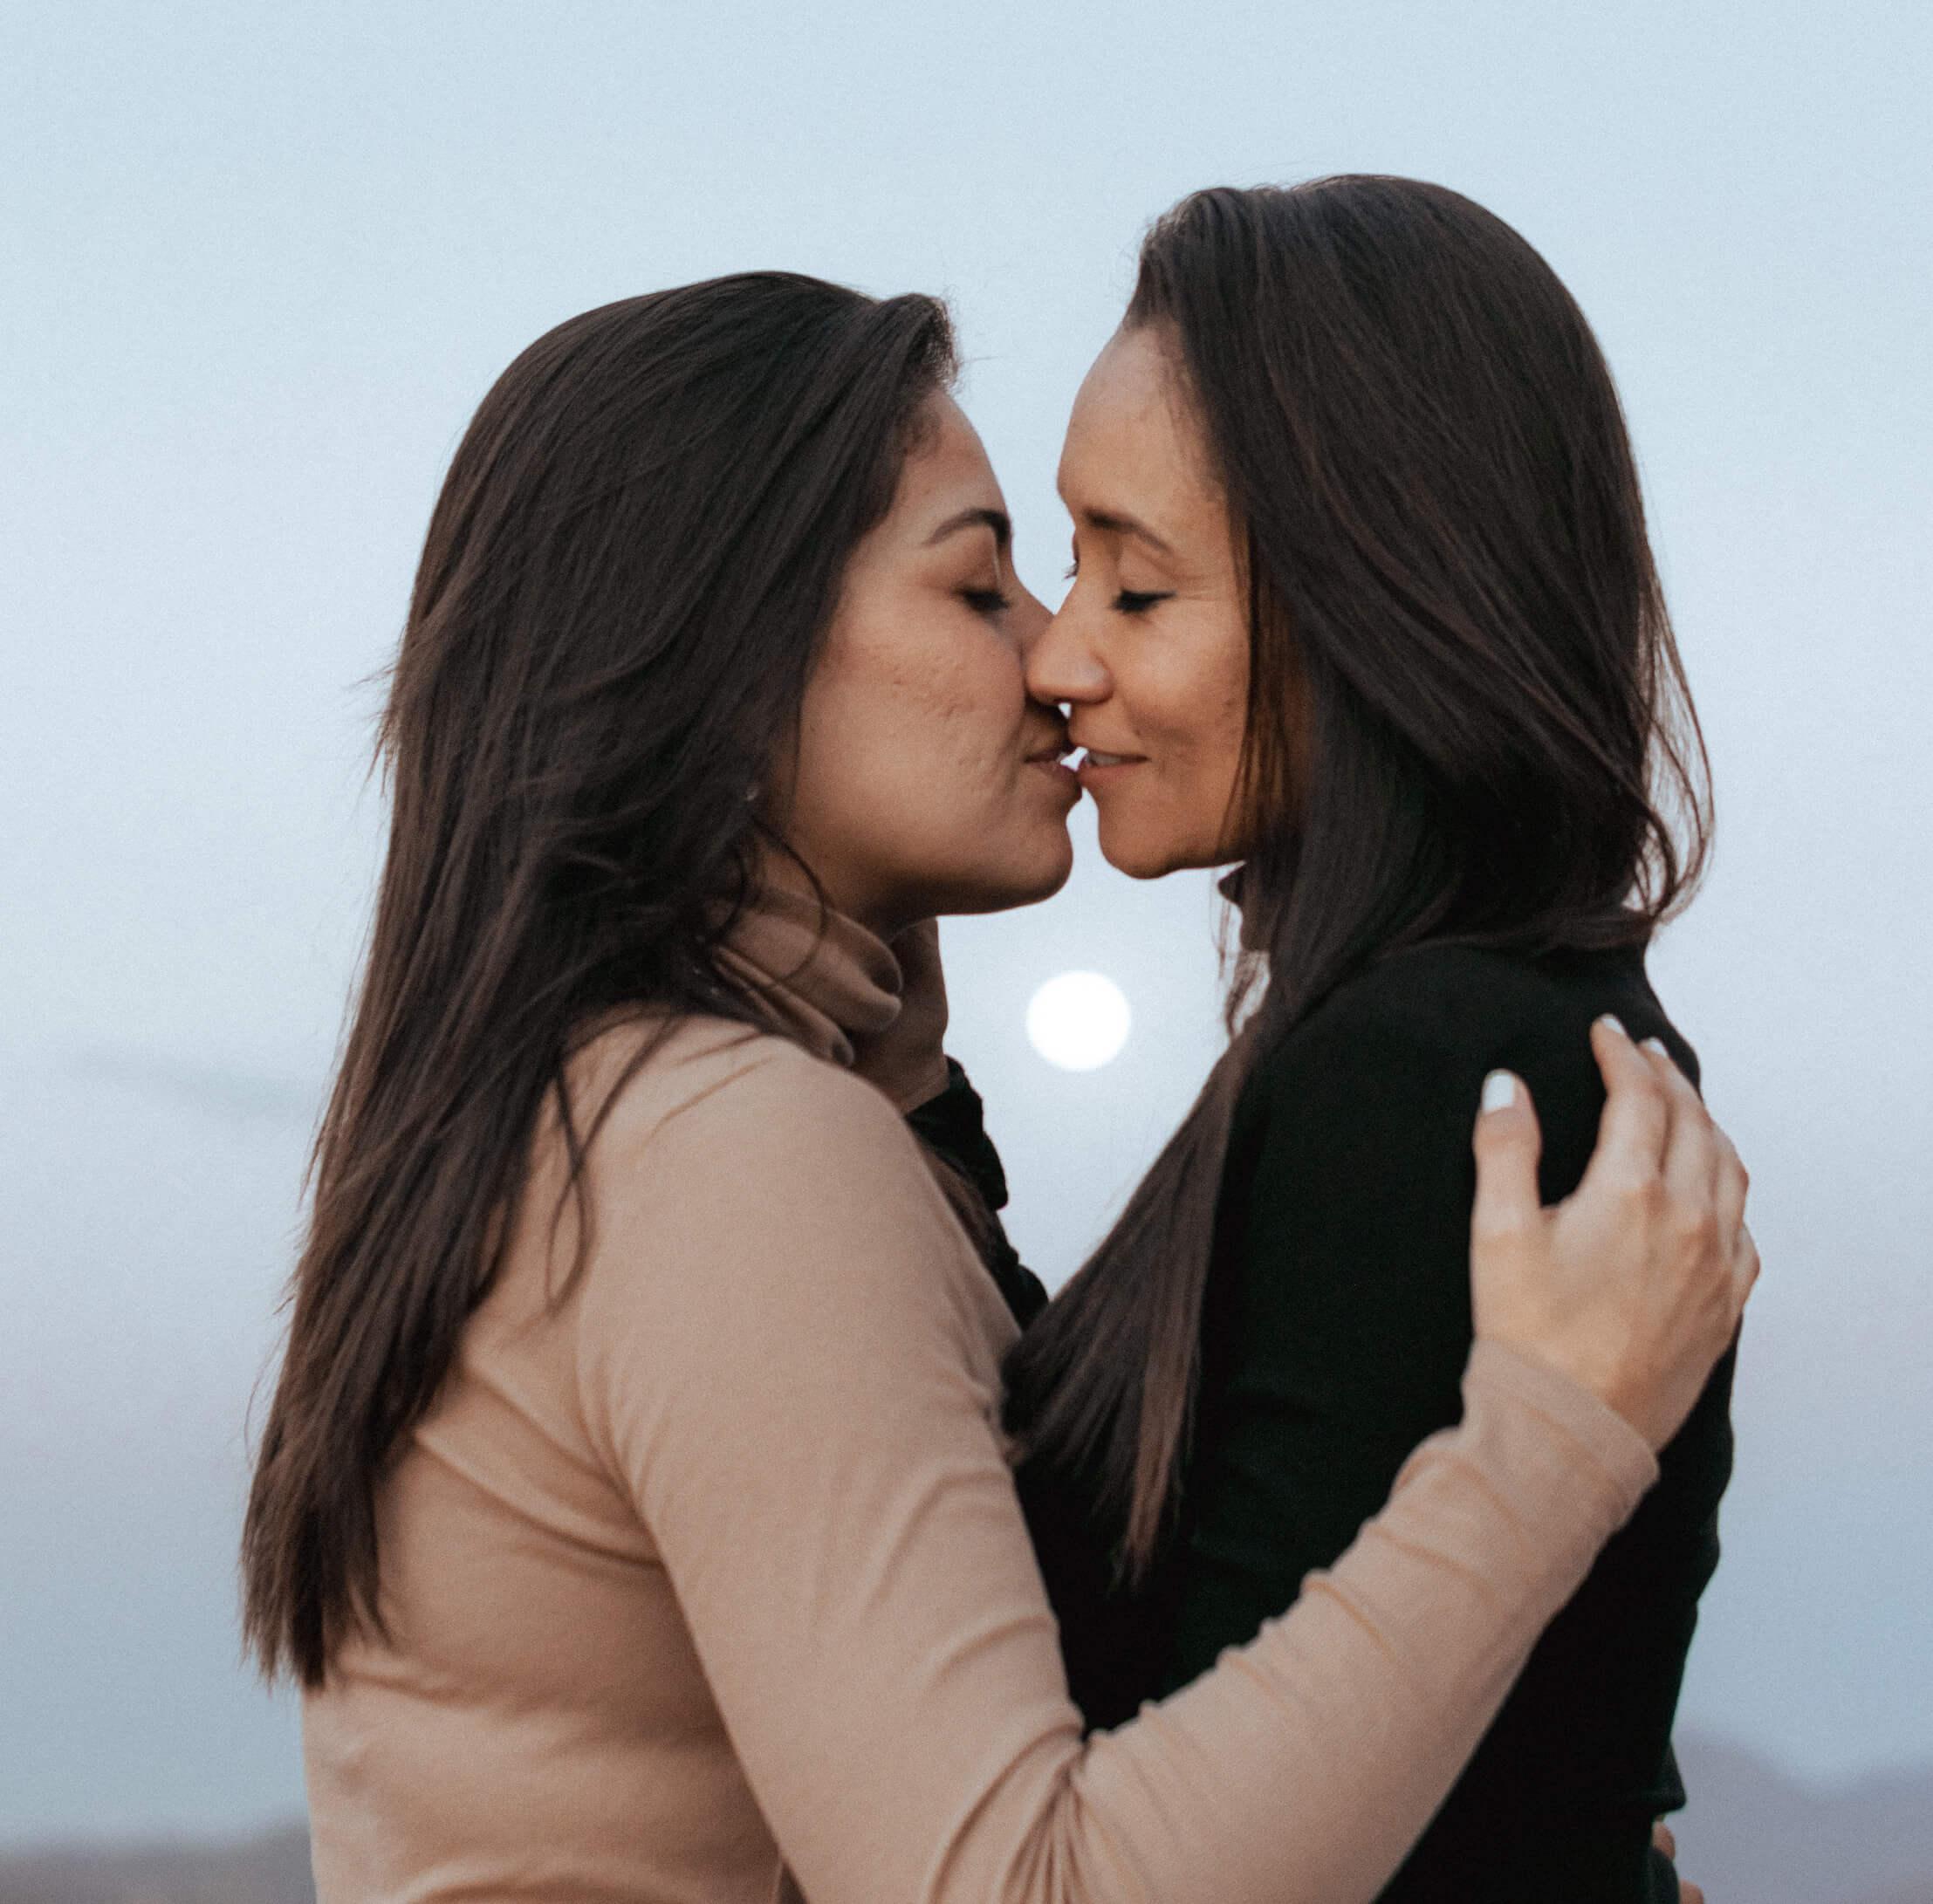 An LGBTQIA+ couple kissing and embracing each other